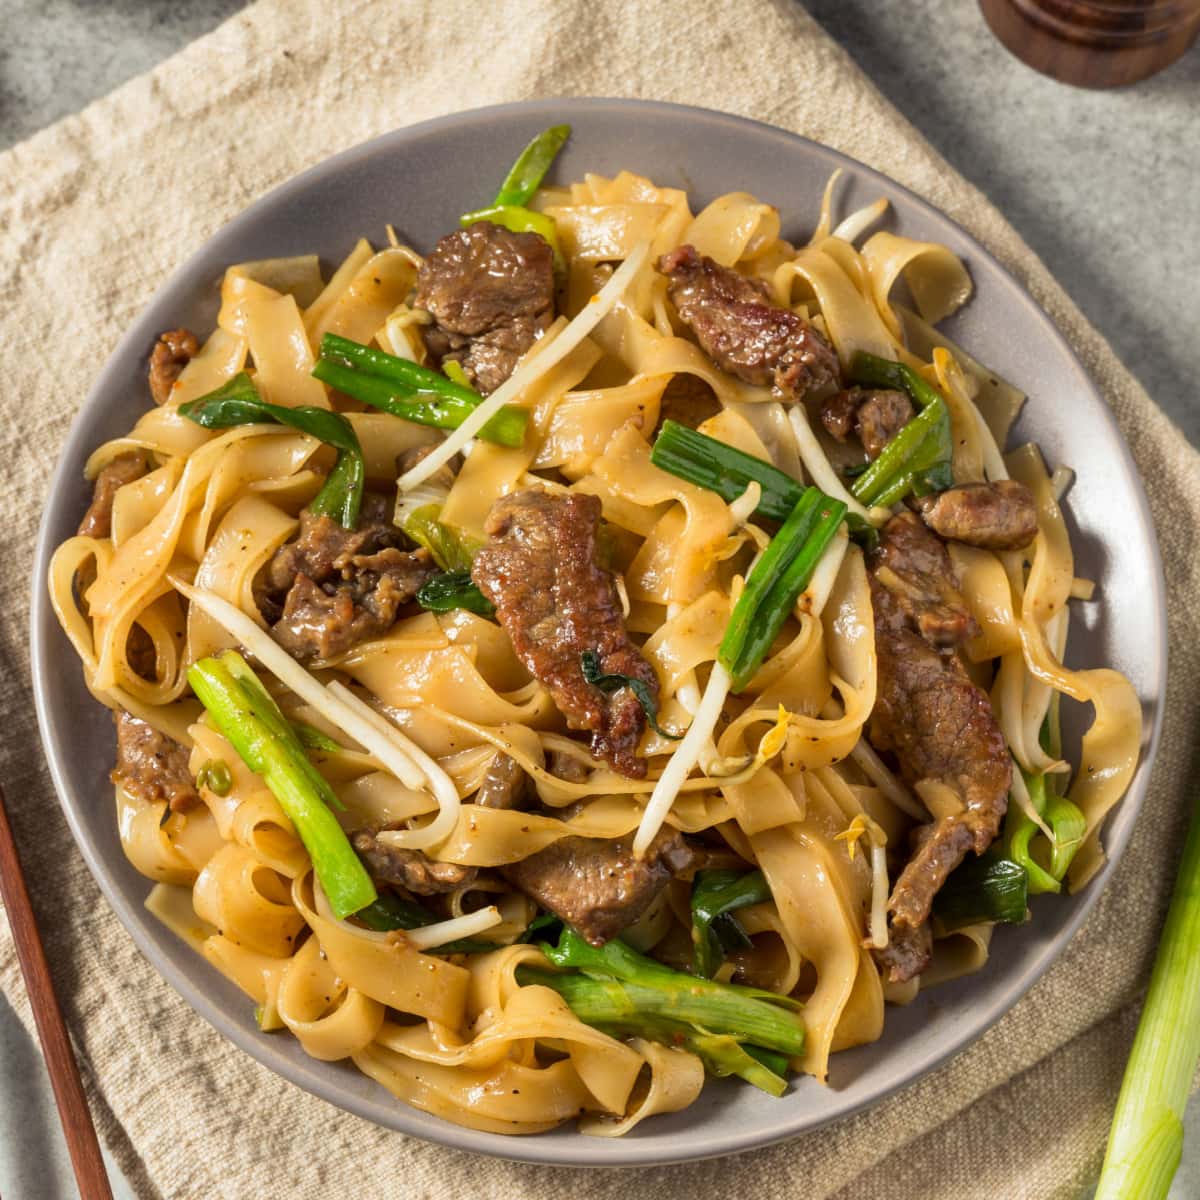 Chow Fun vs. Mei Fun- All You Need to Know featuring Stir Fry Beef Chow Fun on a Plate with Lemongrass